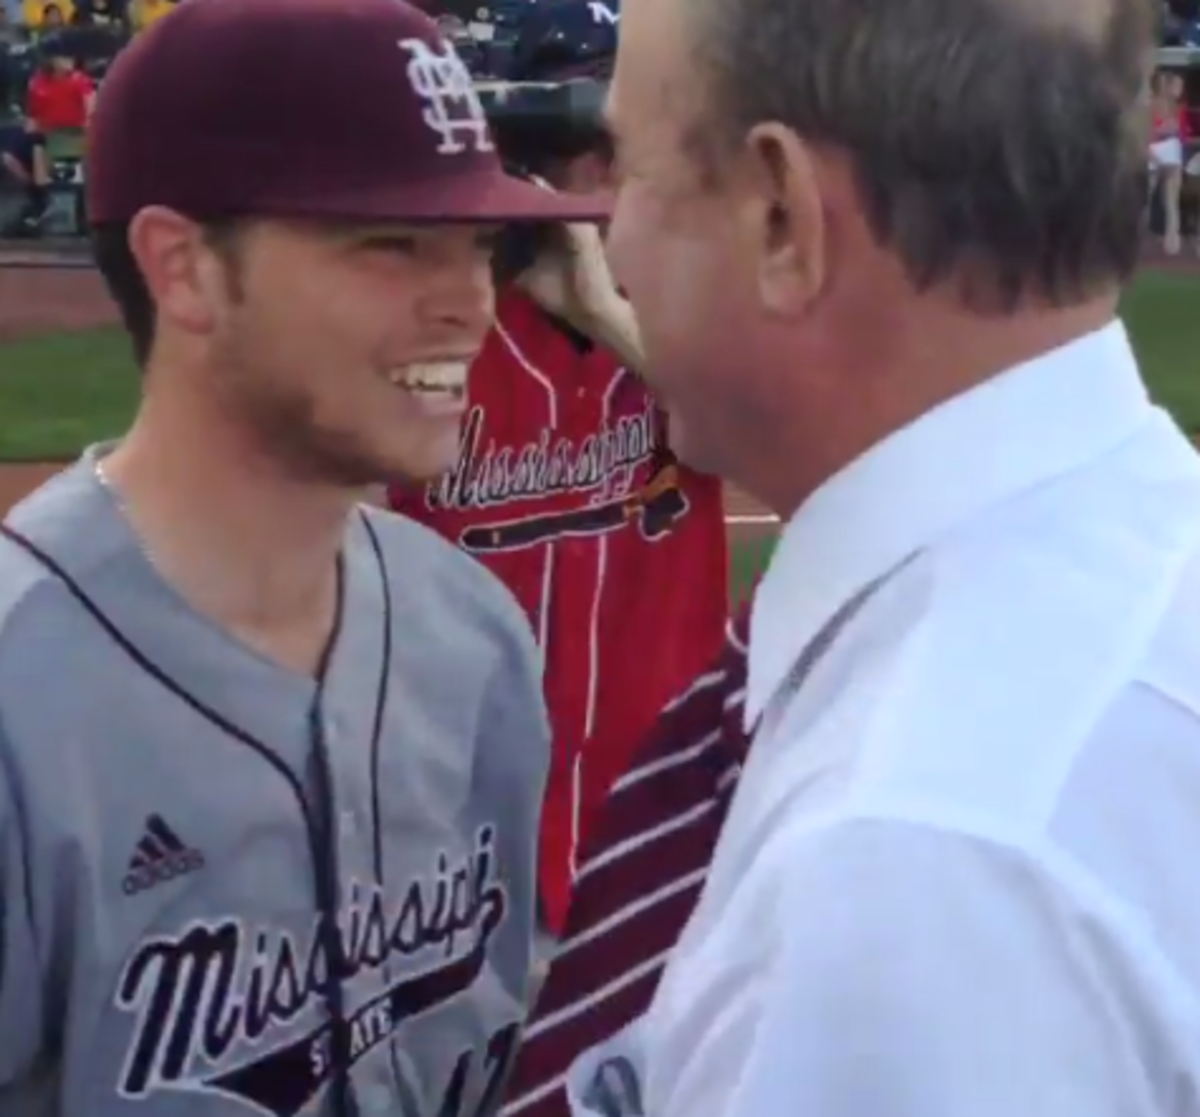 Ben Howland throws out first pitch at Mississippi State.